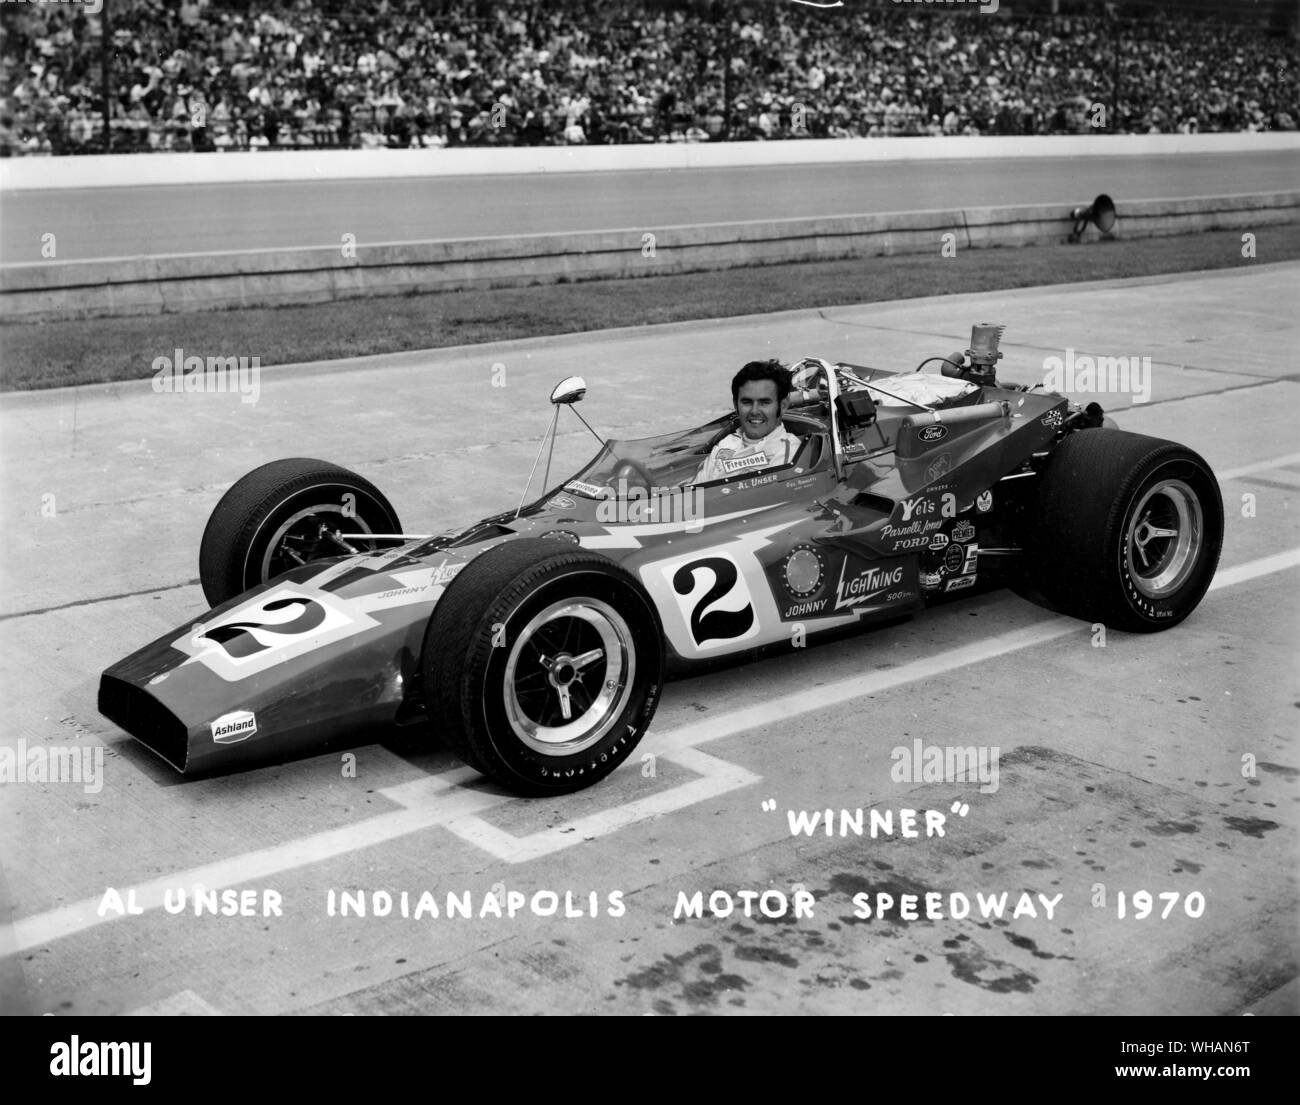 Al Unser 1970. Indianapolis Motor Speedway Stock Photo